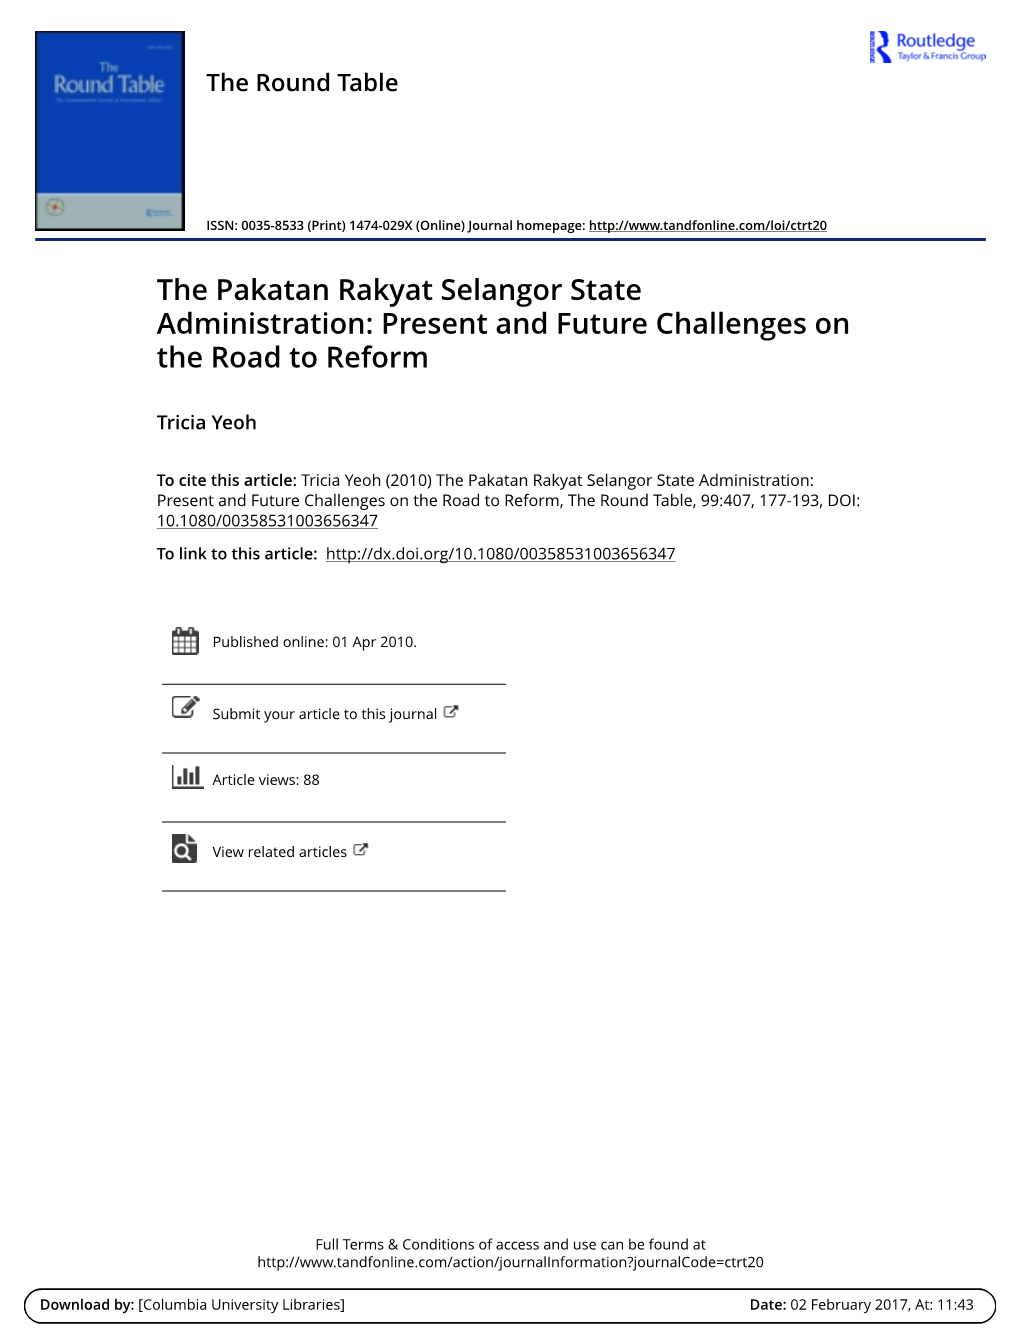 The Pakatan Rakyat Selangor State Administration: Present and Future Challenges on the Road to Reform